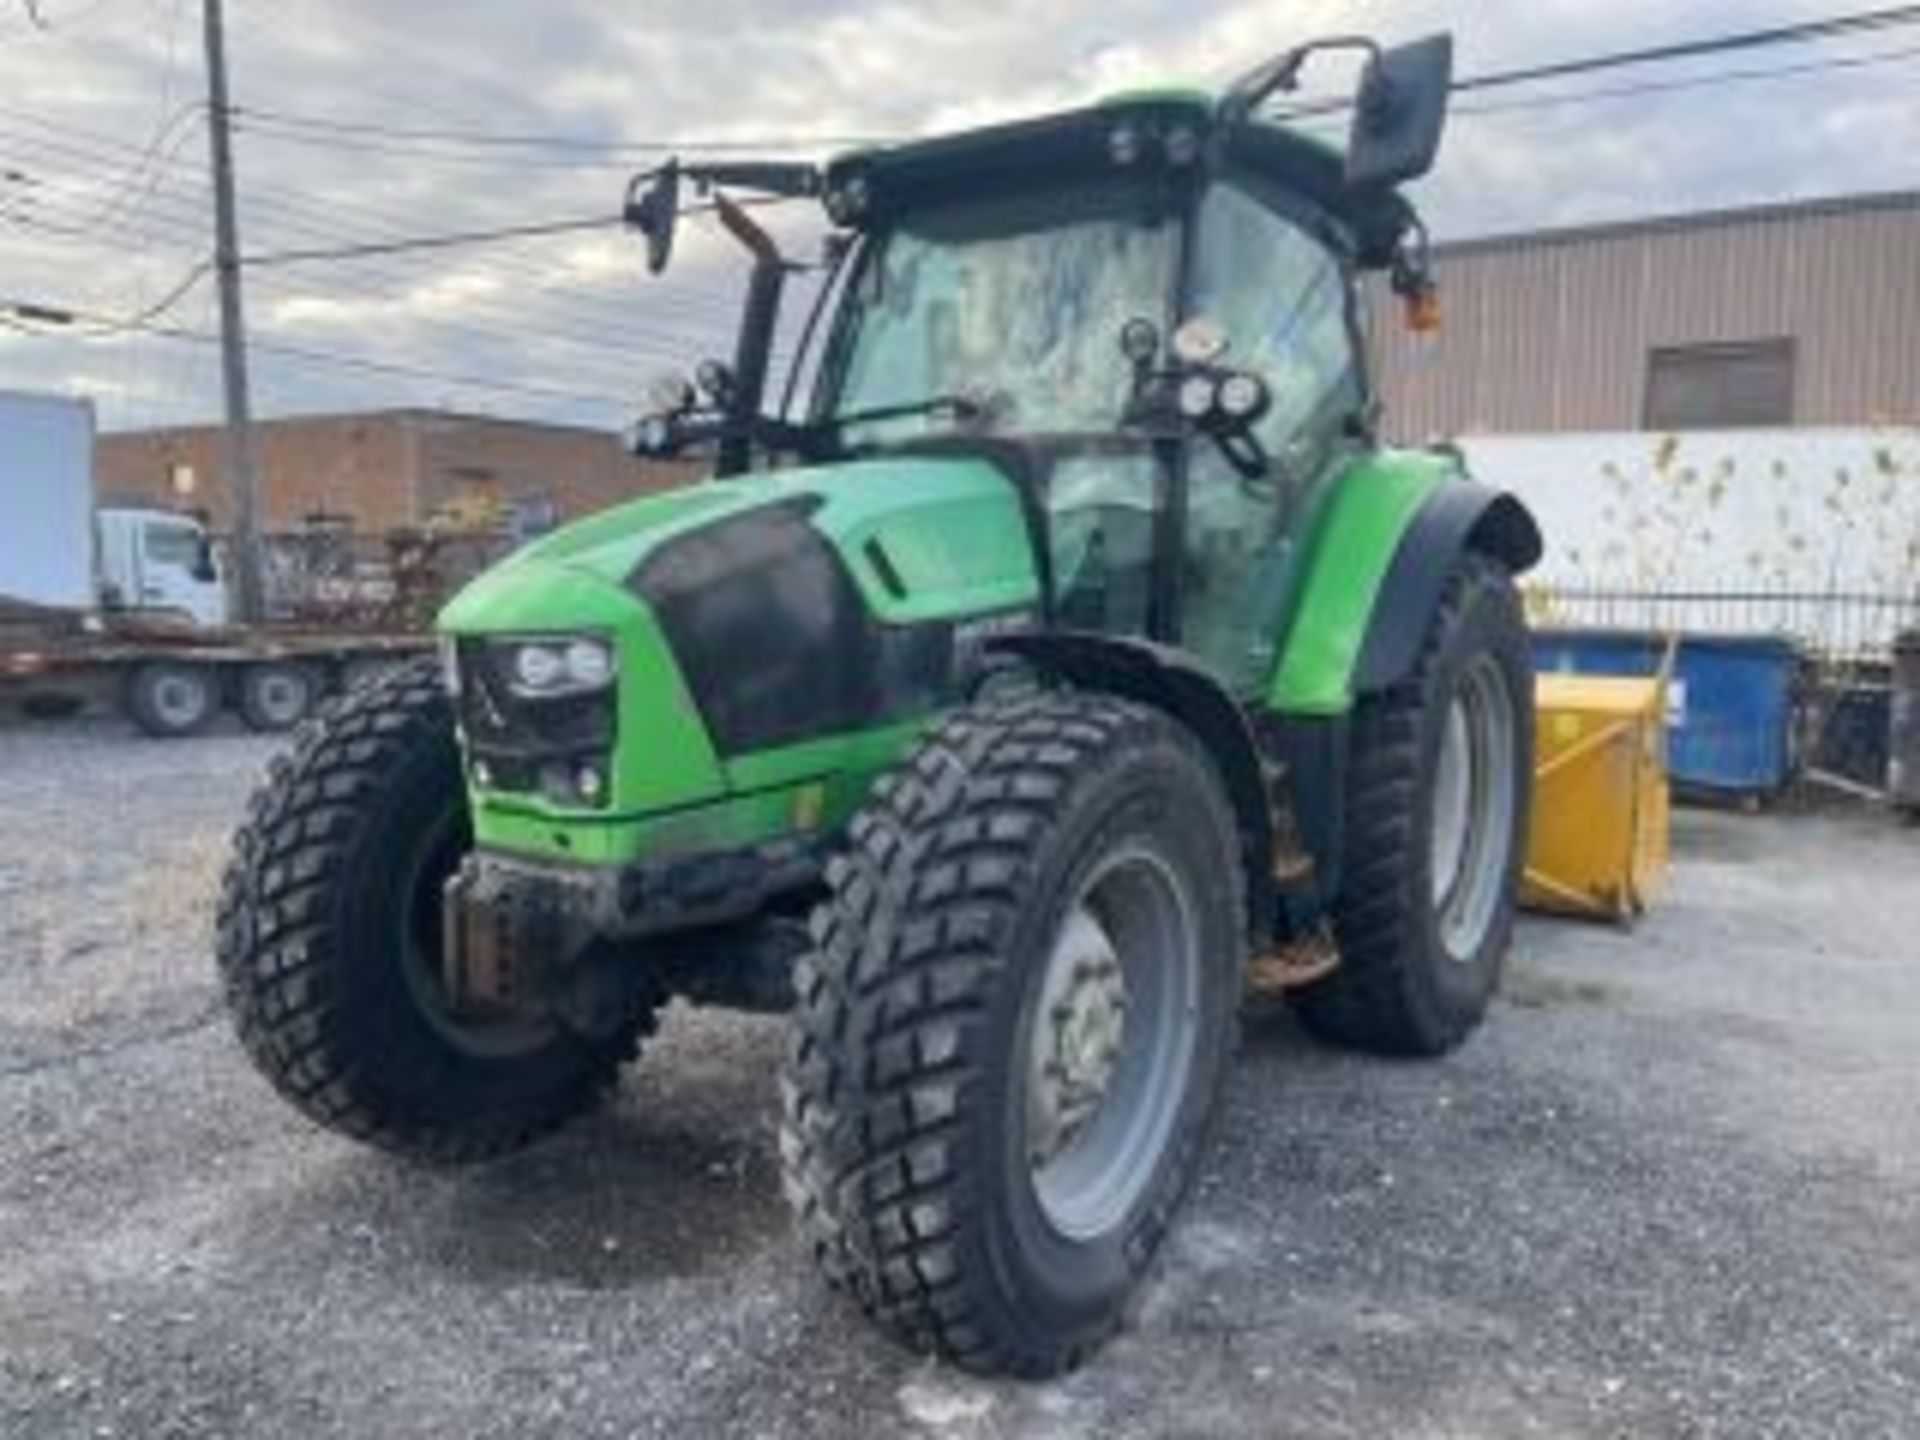 2018 DEUTZ-FAHR agricultural tractor # T51-10003 With PRONOVOST snow removal attachment 1109.8 Hours